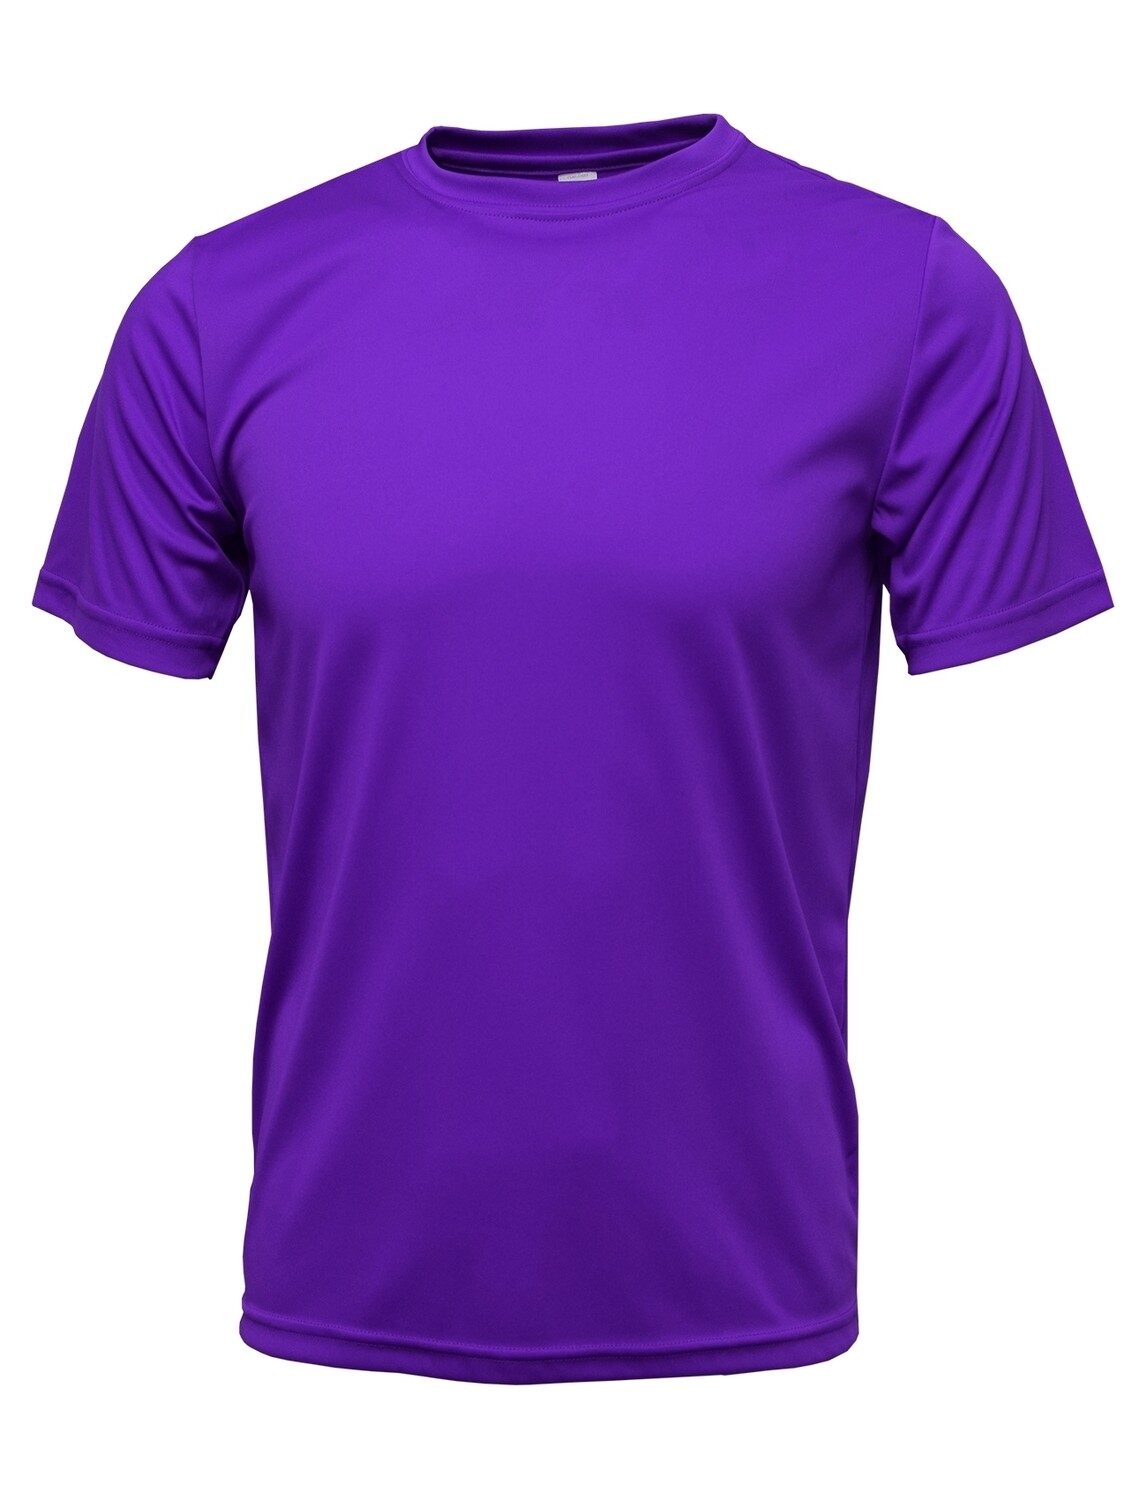 Purple SS / Front Print Only $9.85